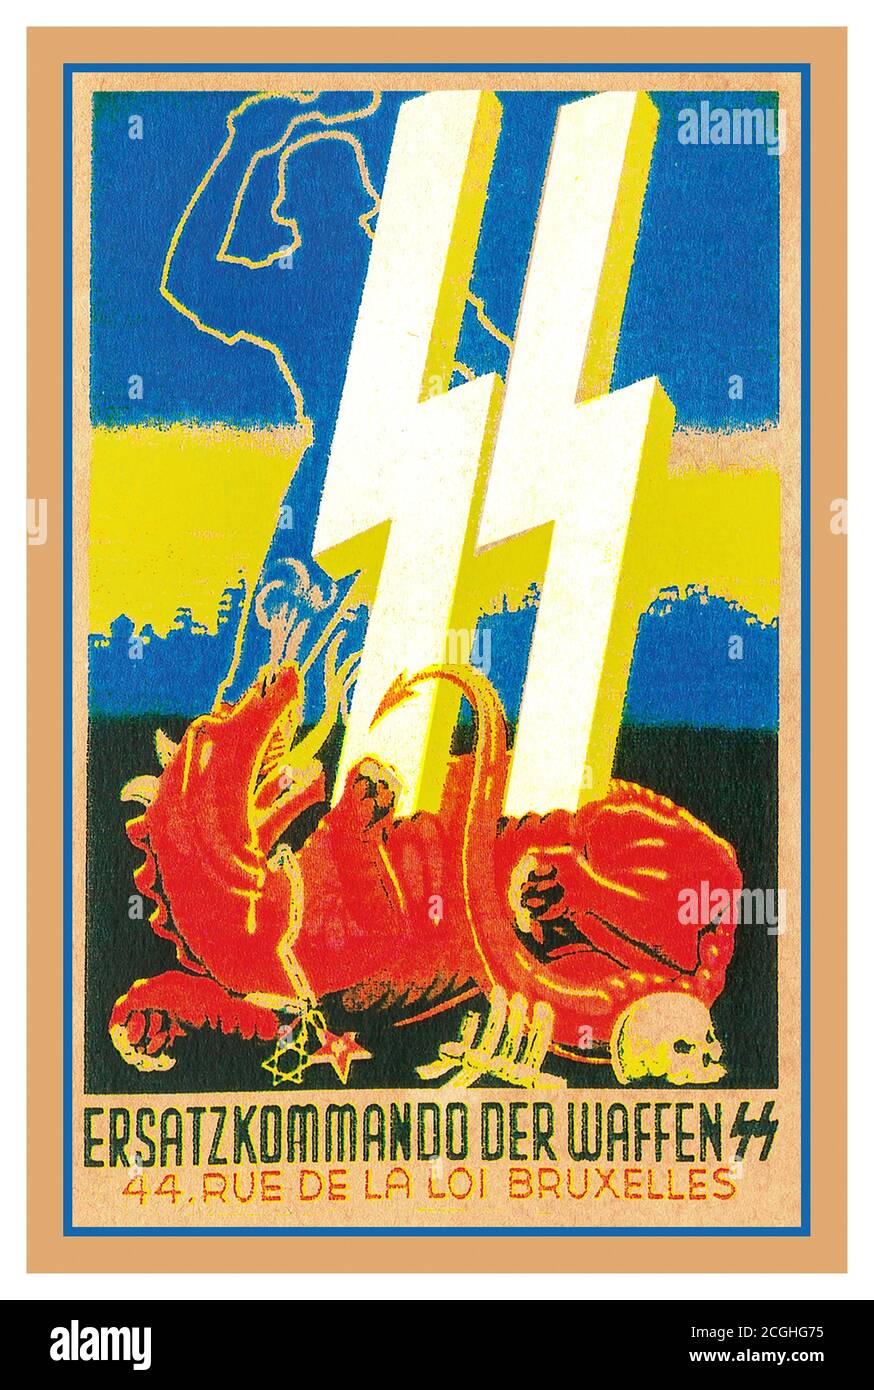 Vintage Belgian Nazi Propaganda Poster 'Ersatzkommando der Waffen SS 44 Rue De La Loi Bruxelles' Poster showing SS symbol knifing through Flemish lion, published by Kofer of Berlin, A collaborationist military formation recruited among French-speaking volunteers from German-occupied Belgium, notably from Brussels and Wallonia Stock Photo